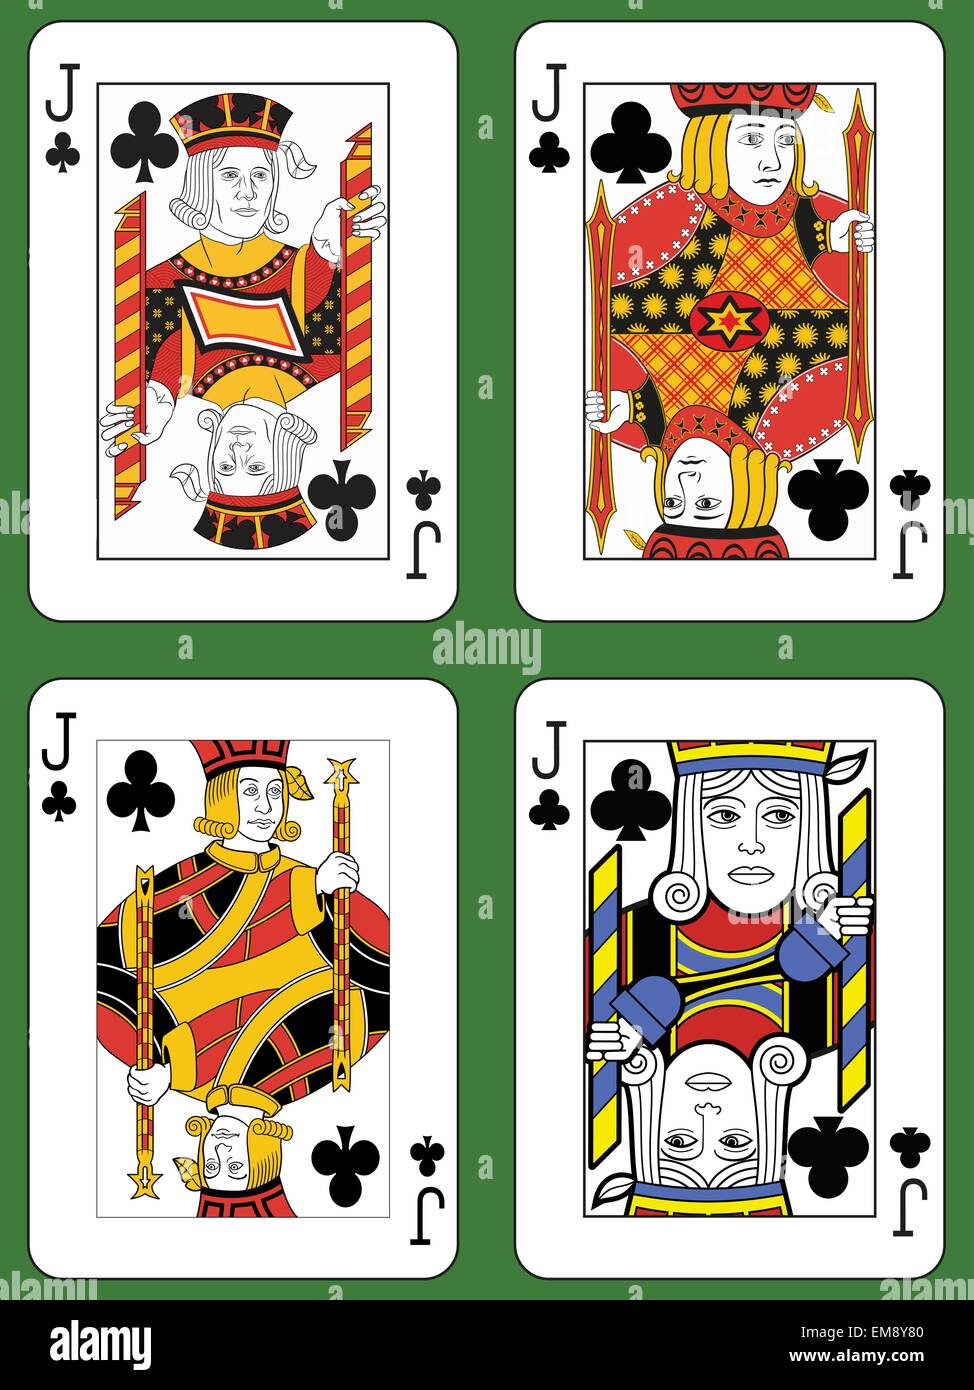 Four Jacks of Clubs in four different styles on a green background Stock Vector